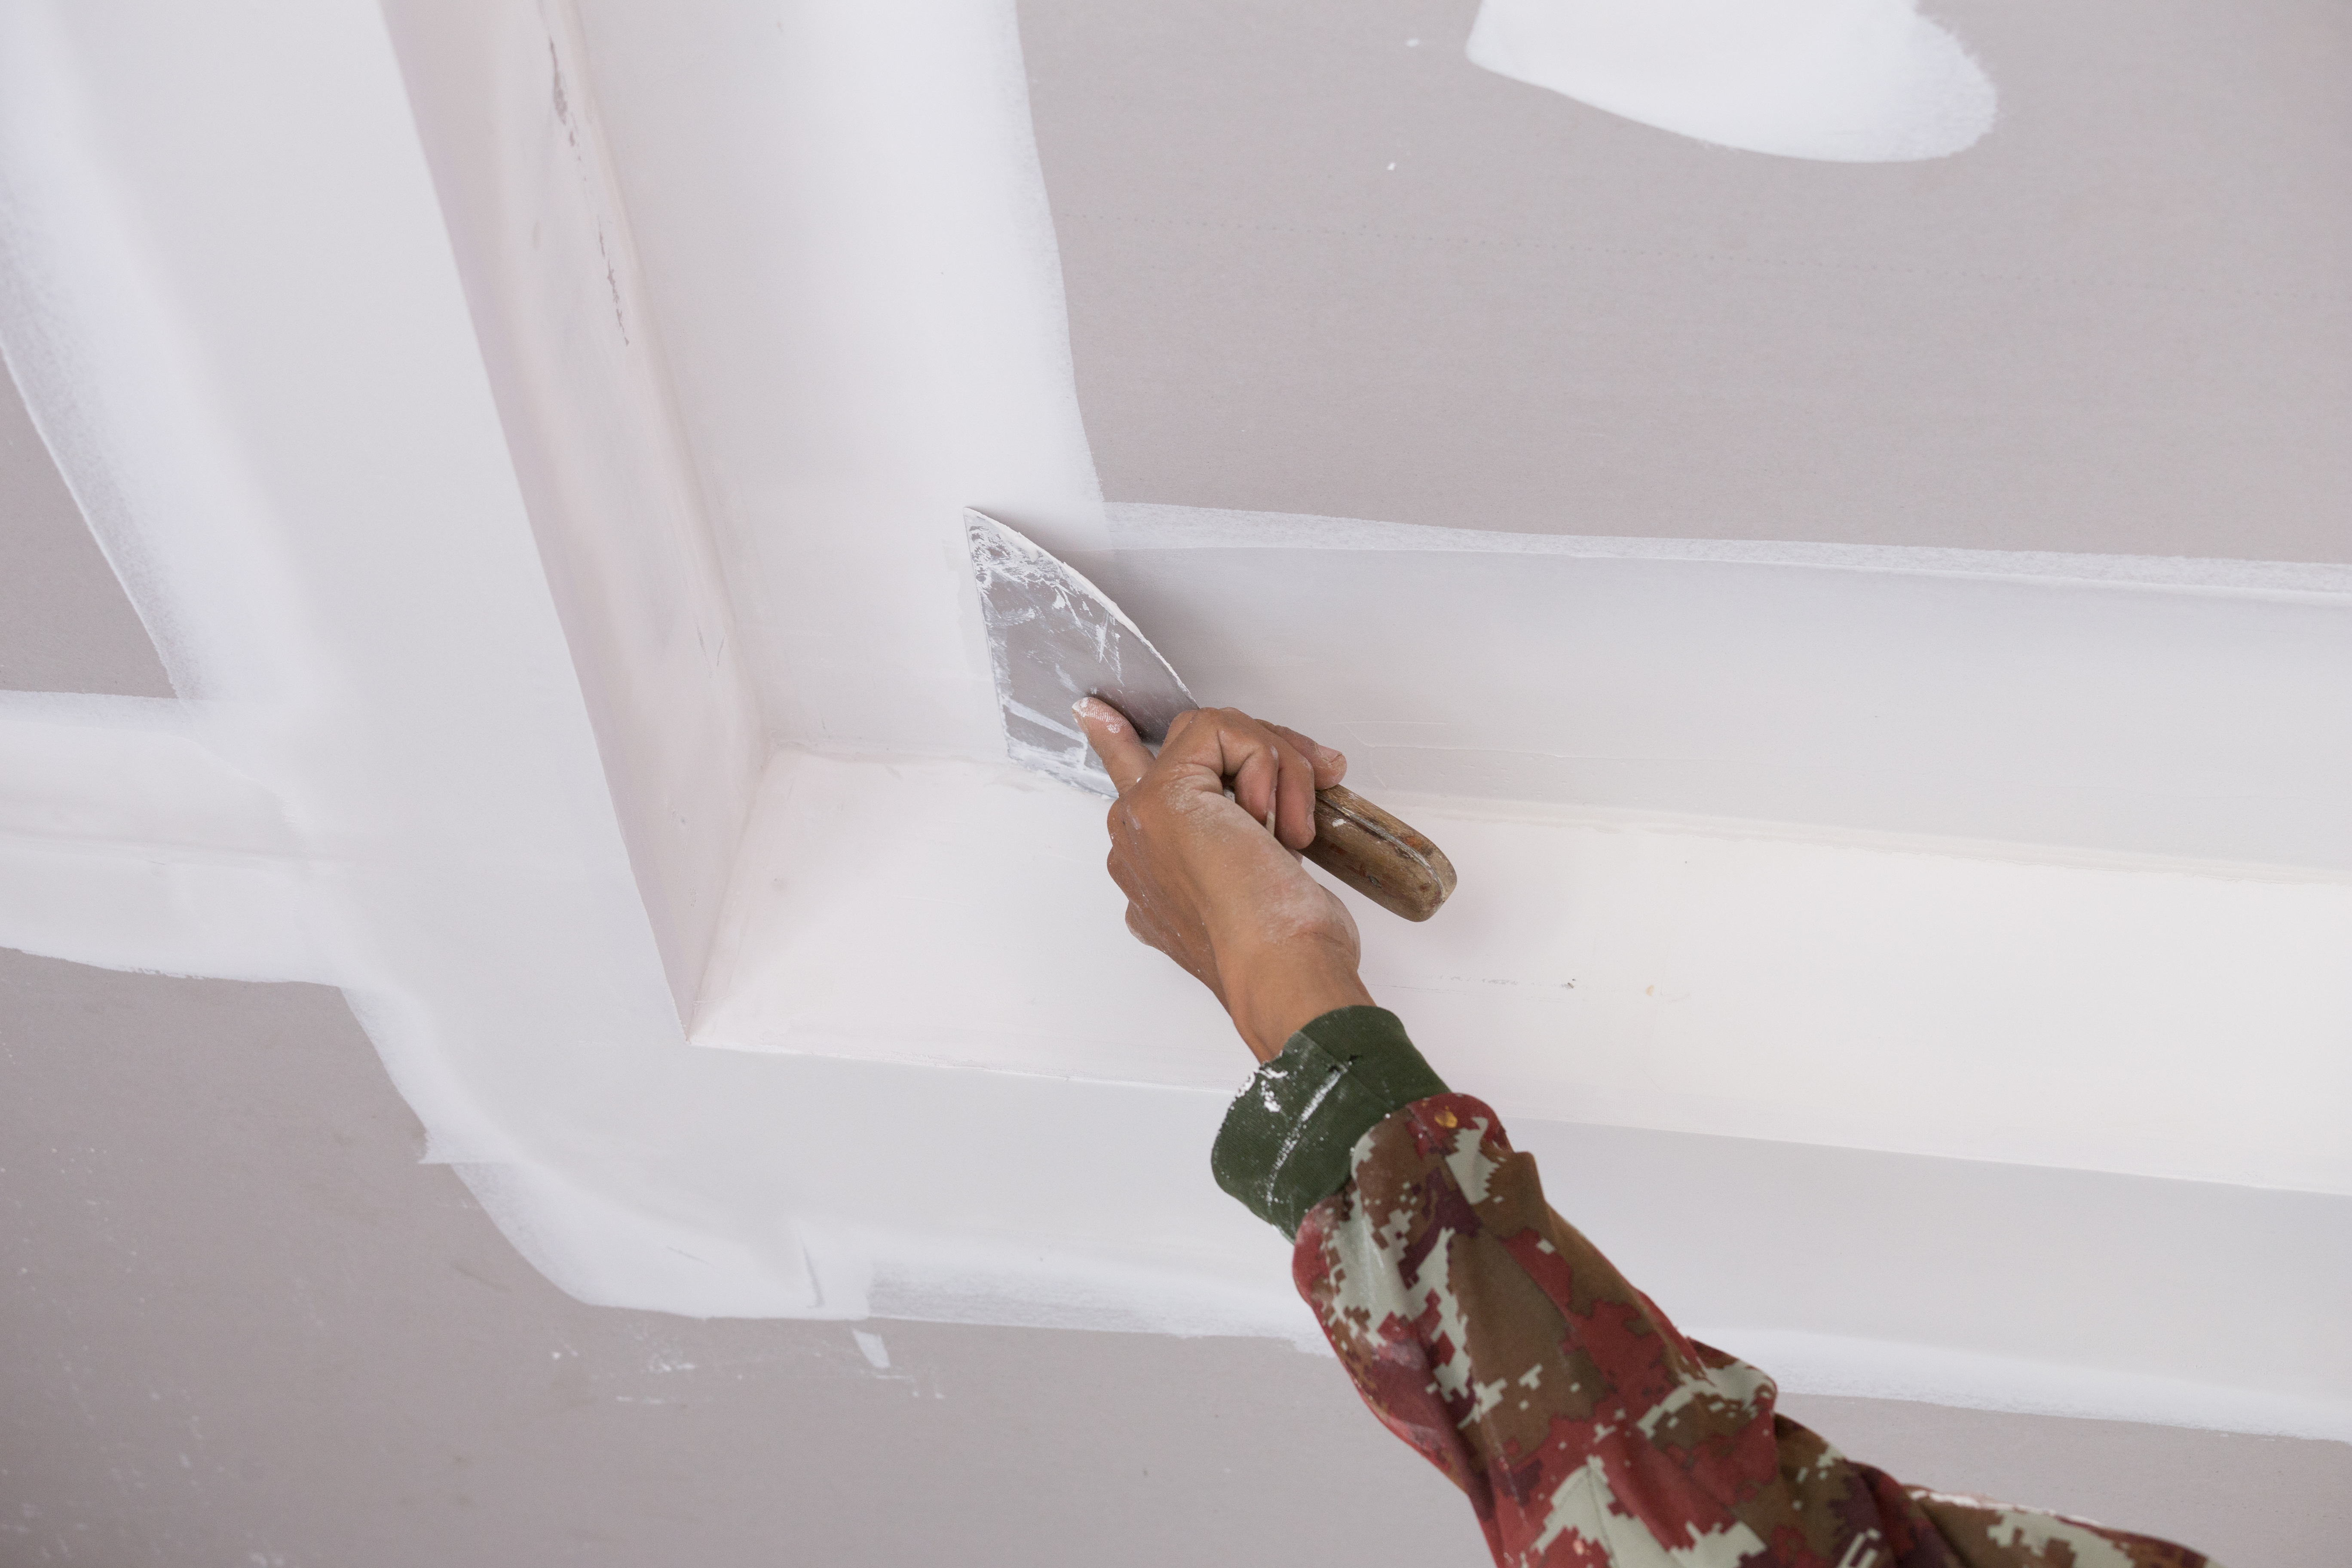 The Tools You Need For Drywall Finishing